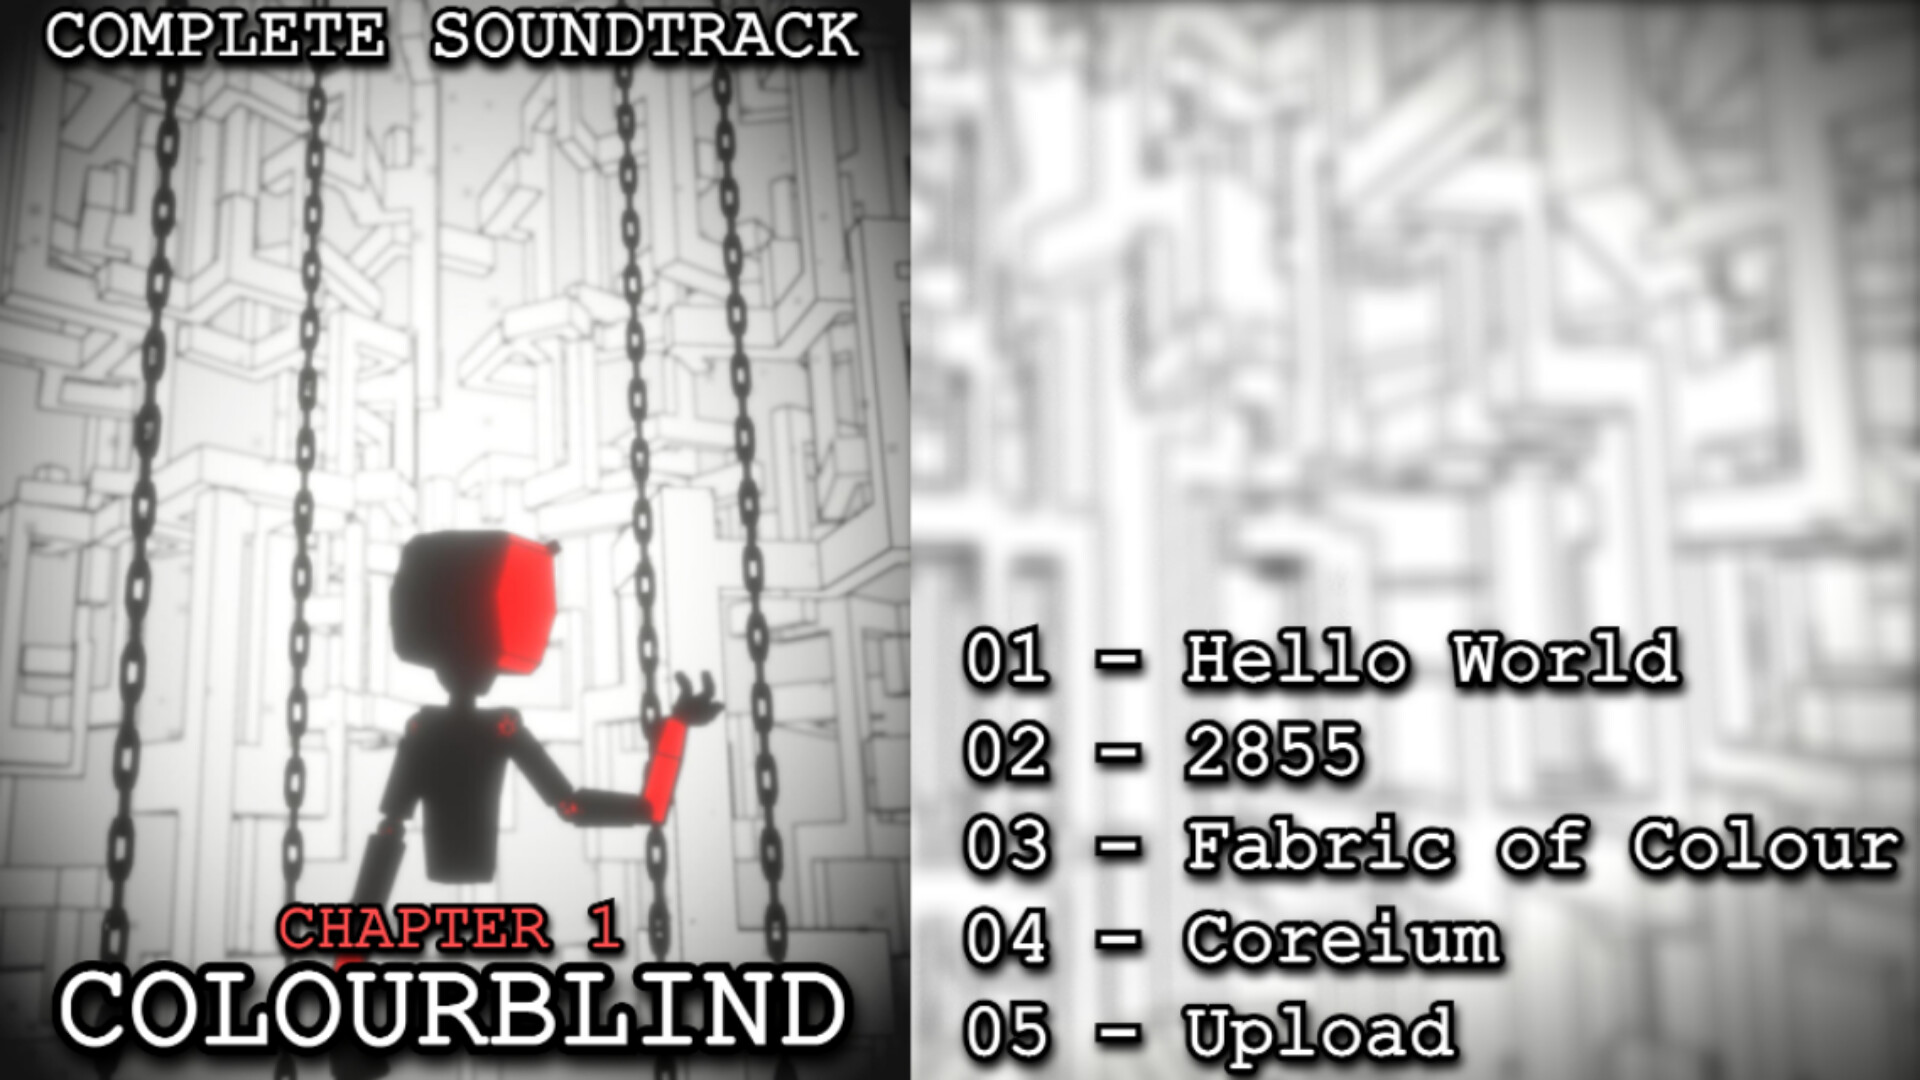 Colourblind Chapter 1 Official Soundtrack Featured Screenshot #1